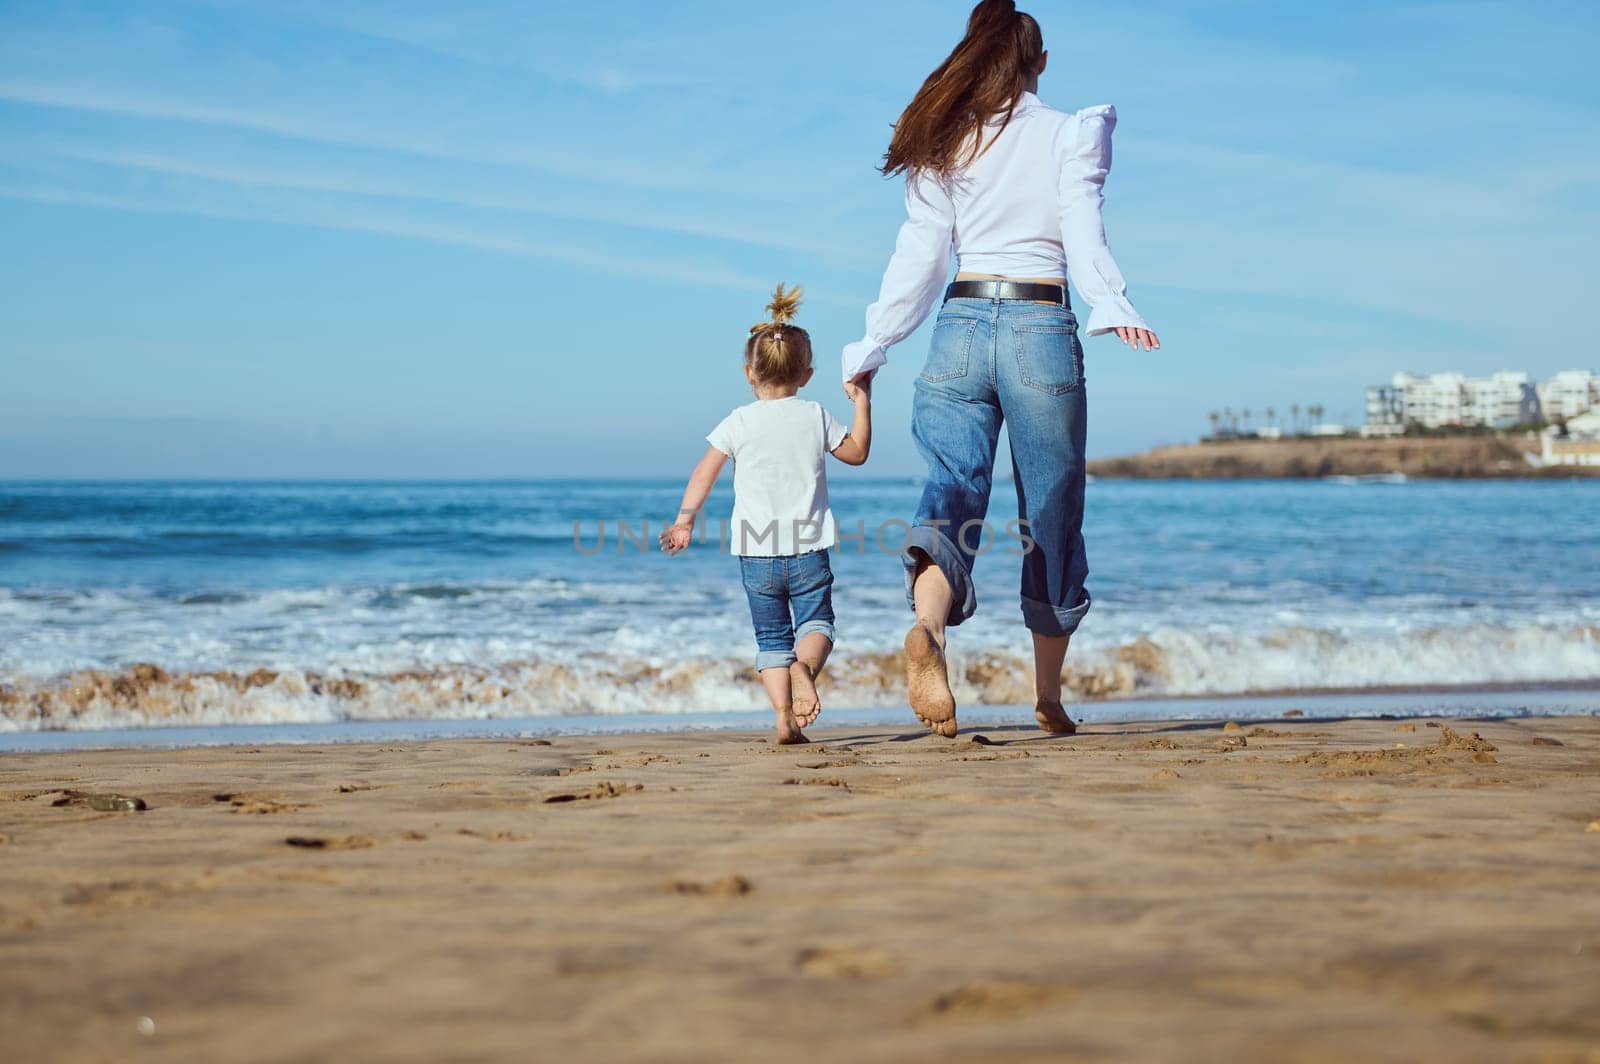 Full length rear portrait of a Caucasian young mother and her little child girl holding hands while walking running barefoot on the sandy beach, dressed together in white shirt and blue denim jeans